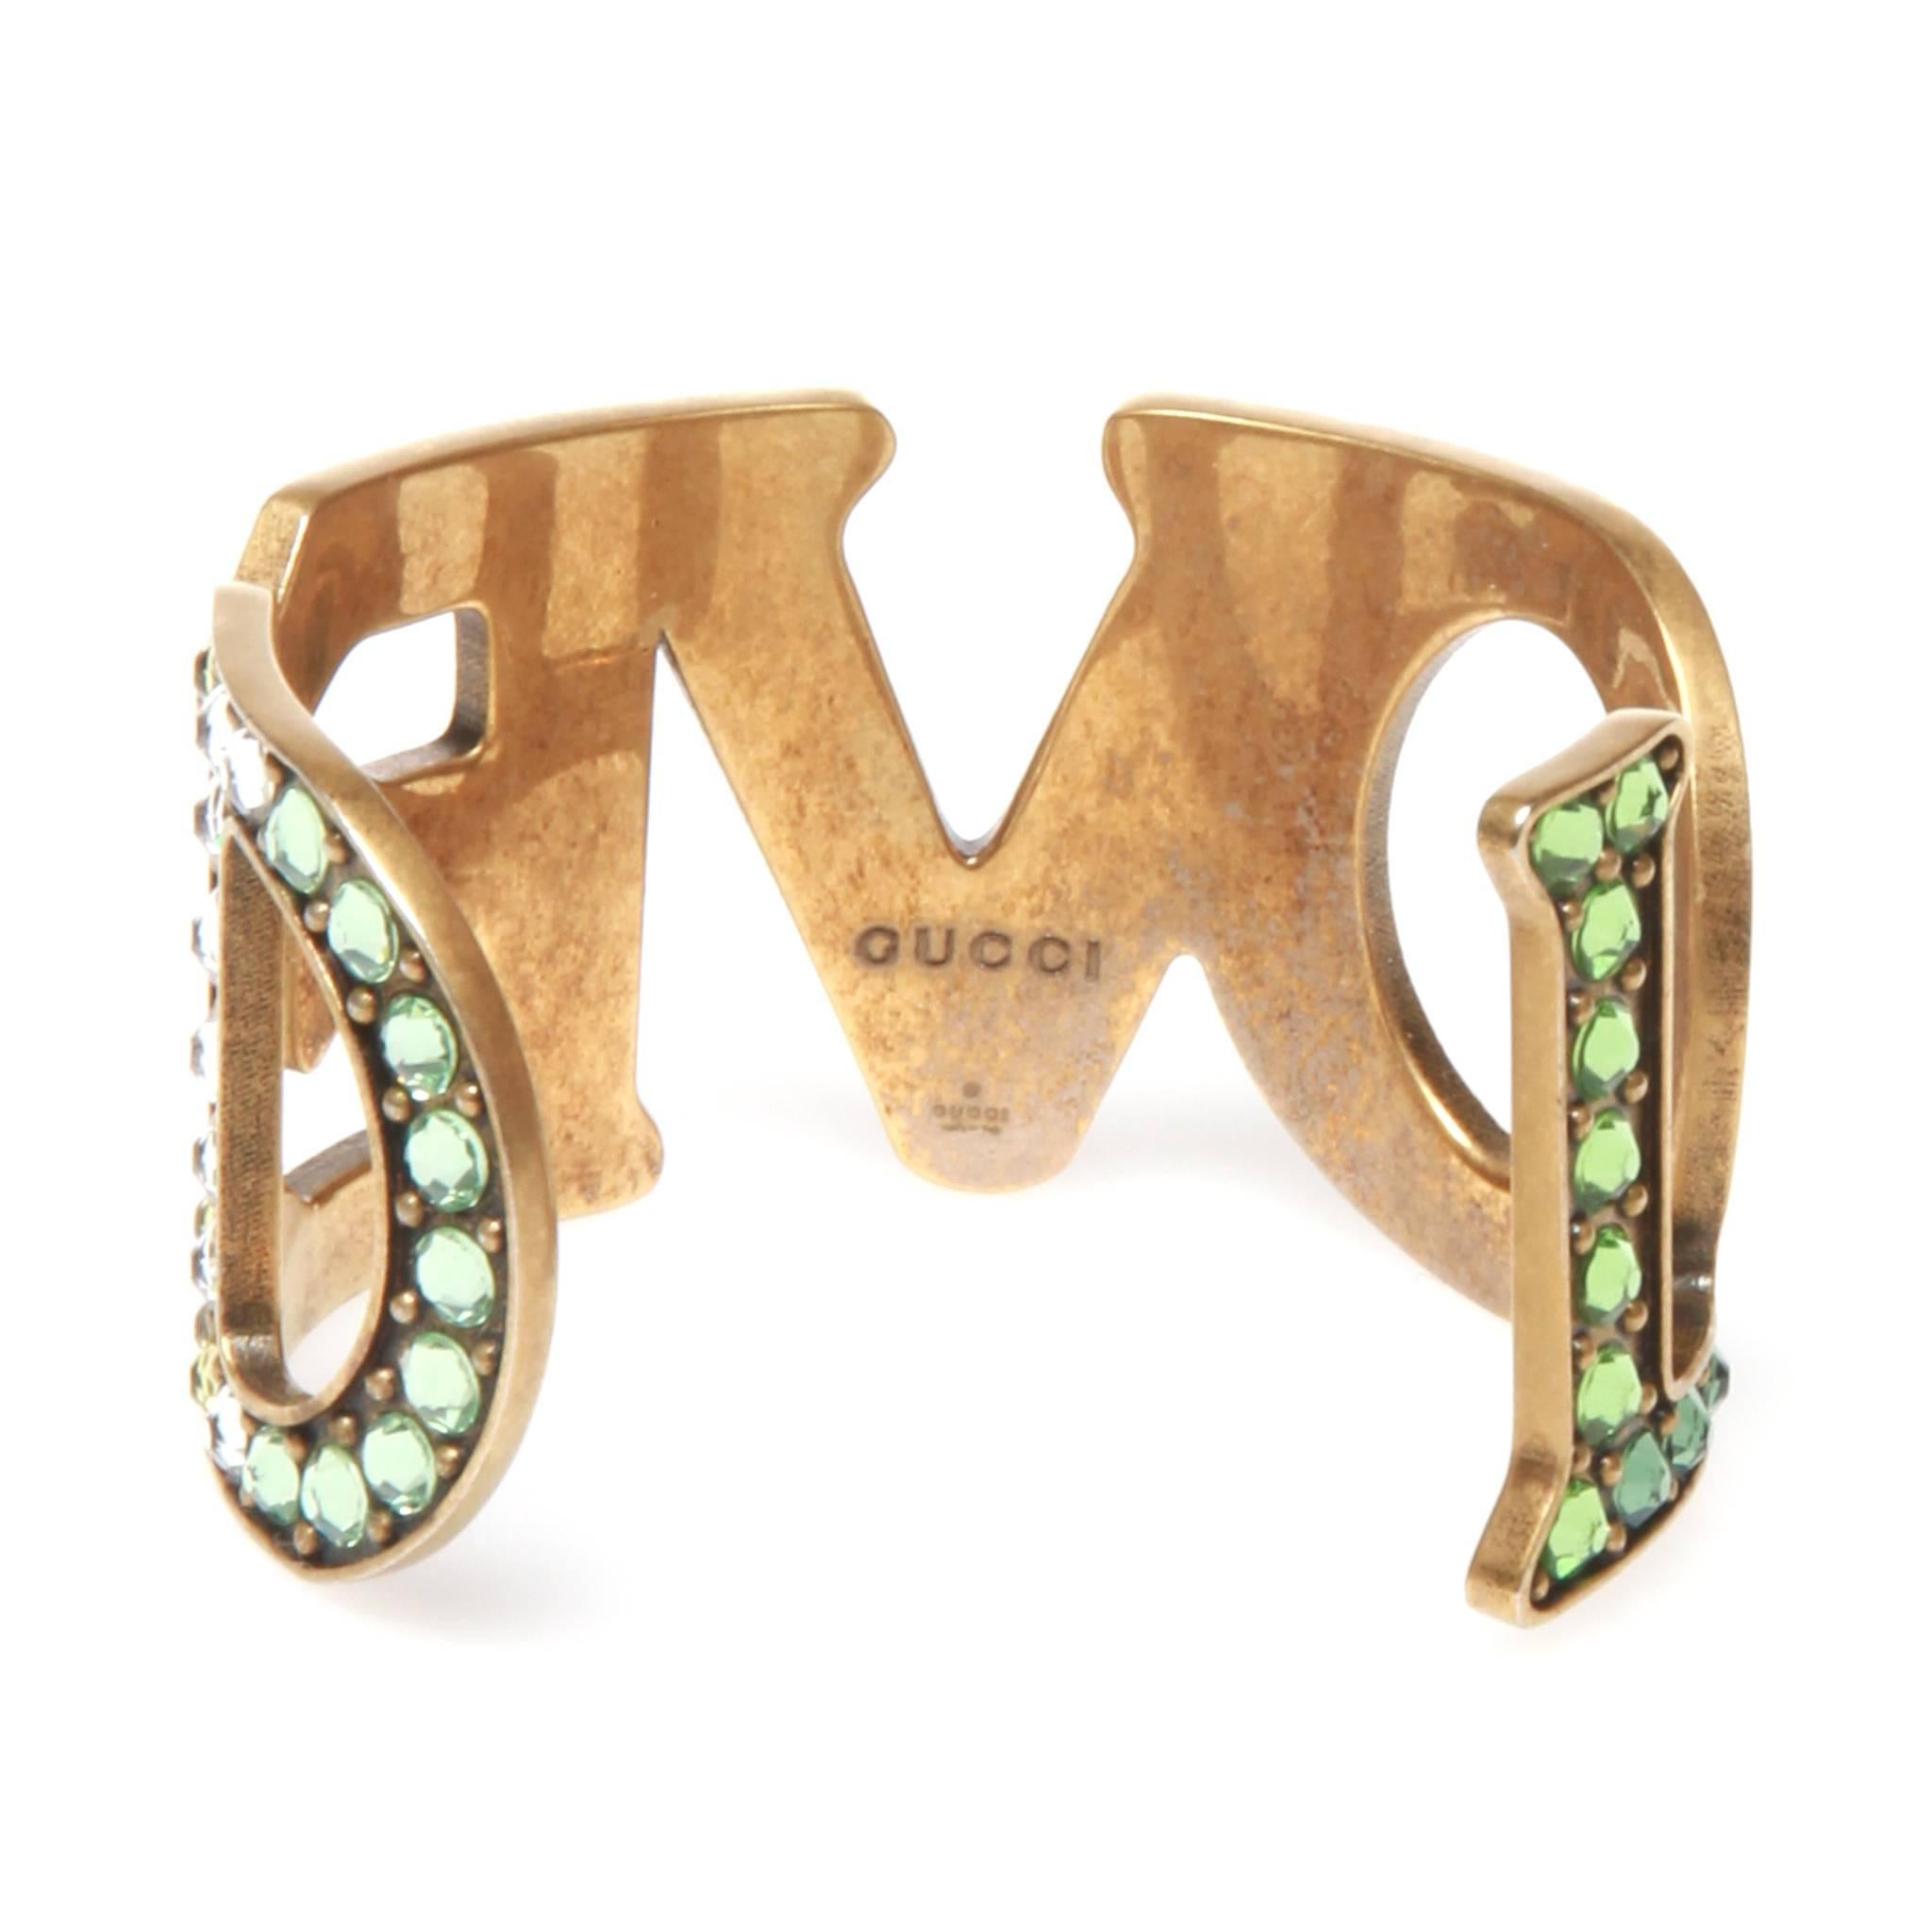 Gold-tone Gucci Loved cuff featuring multicolor crystal. Includes jewelry pouch and box.

6cm diameter at widest part. Open cuff. 